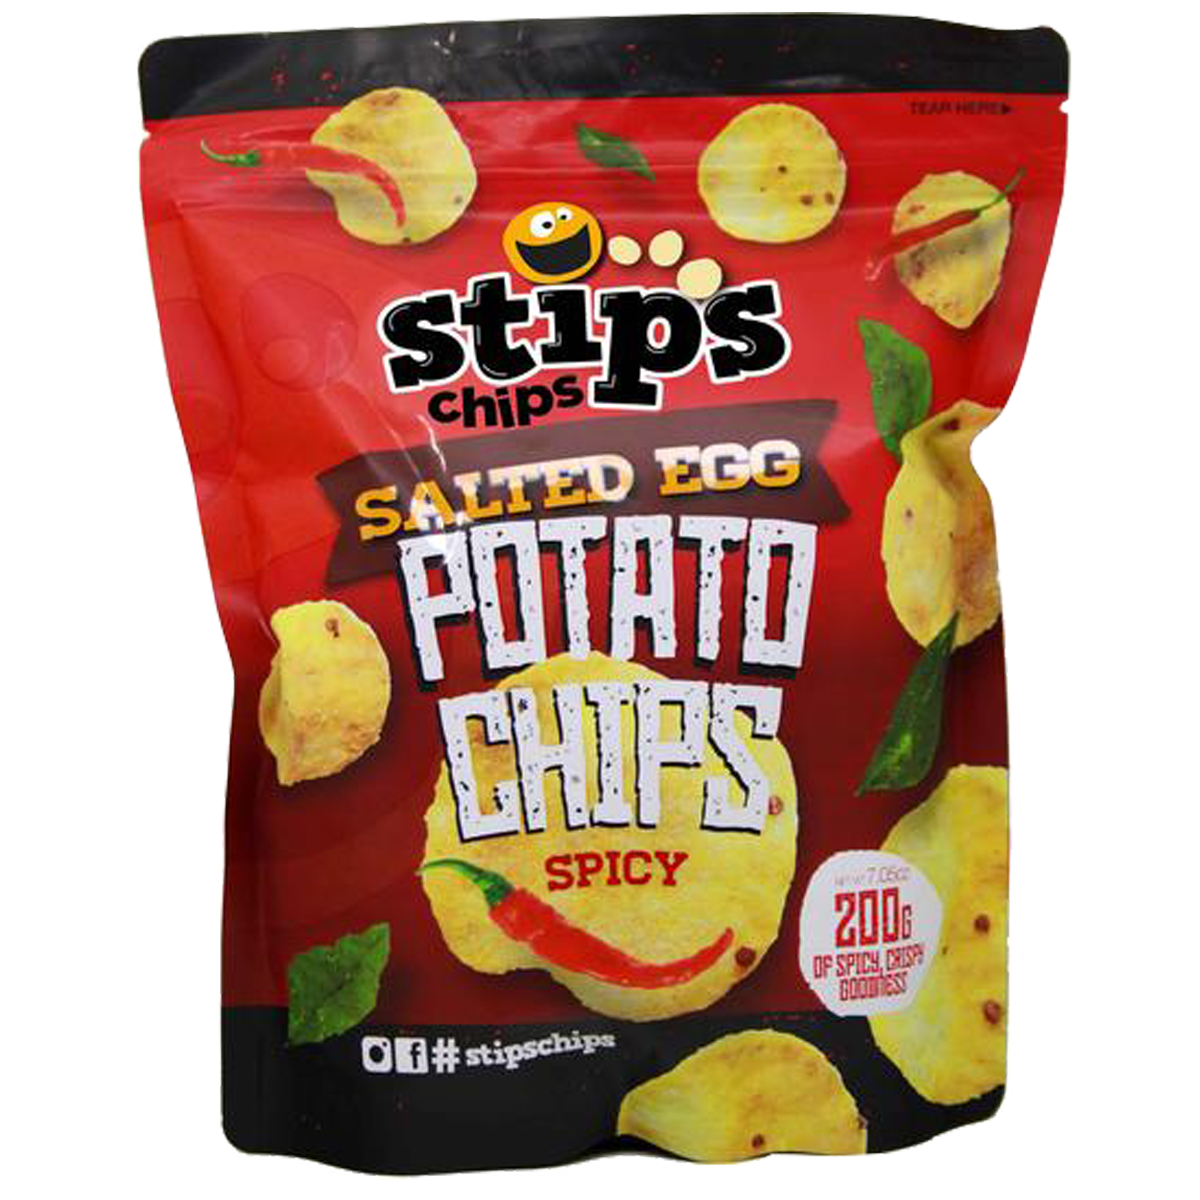 Stip’s Chips Salted Egg Potato Chips Spicy 200g